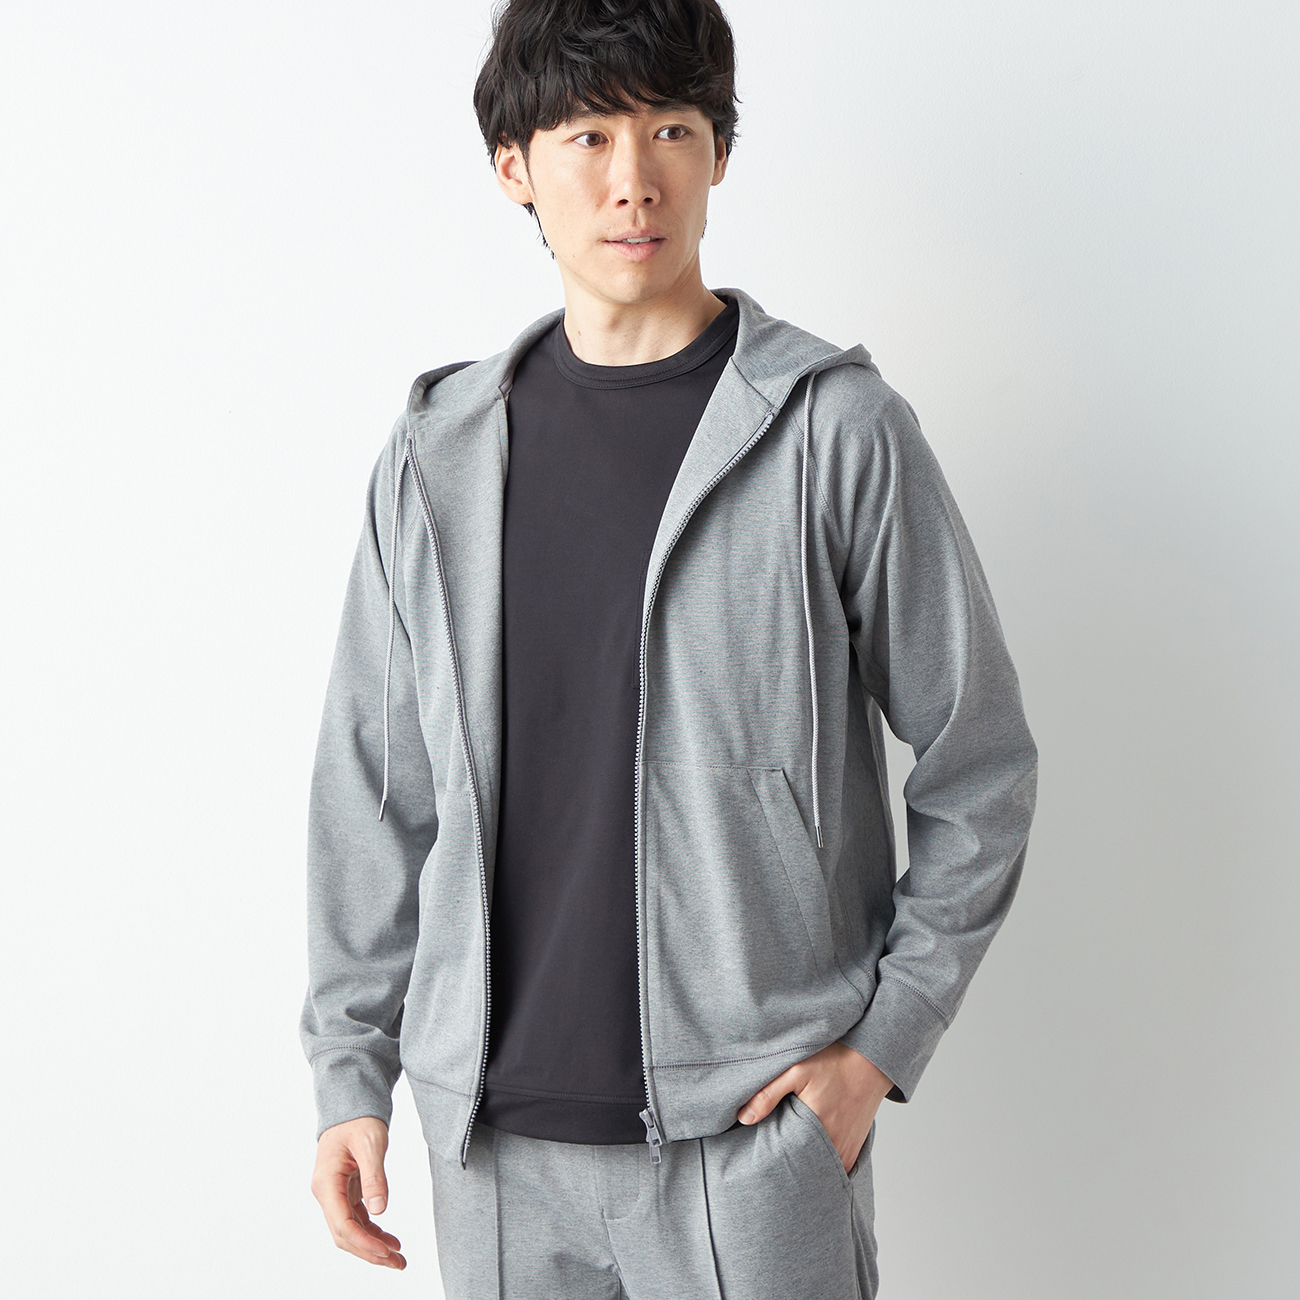 【SPORTY CASUAL】ストレッチジャージパーカー セットアップ着用可